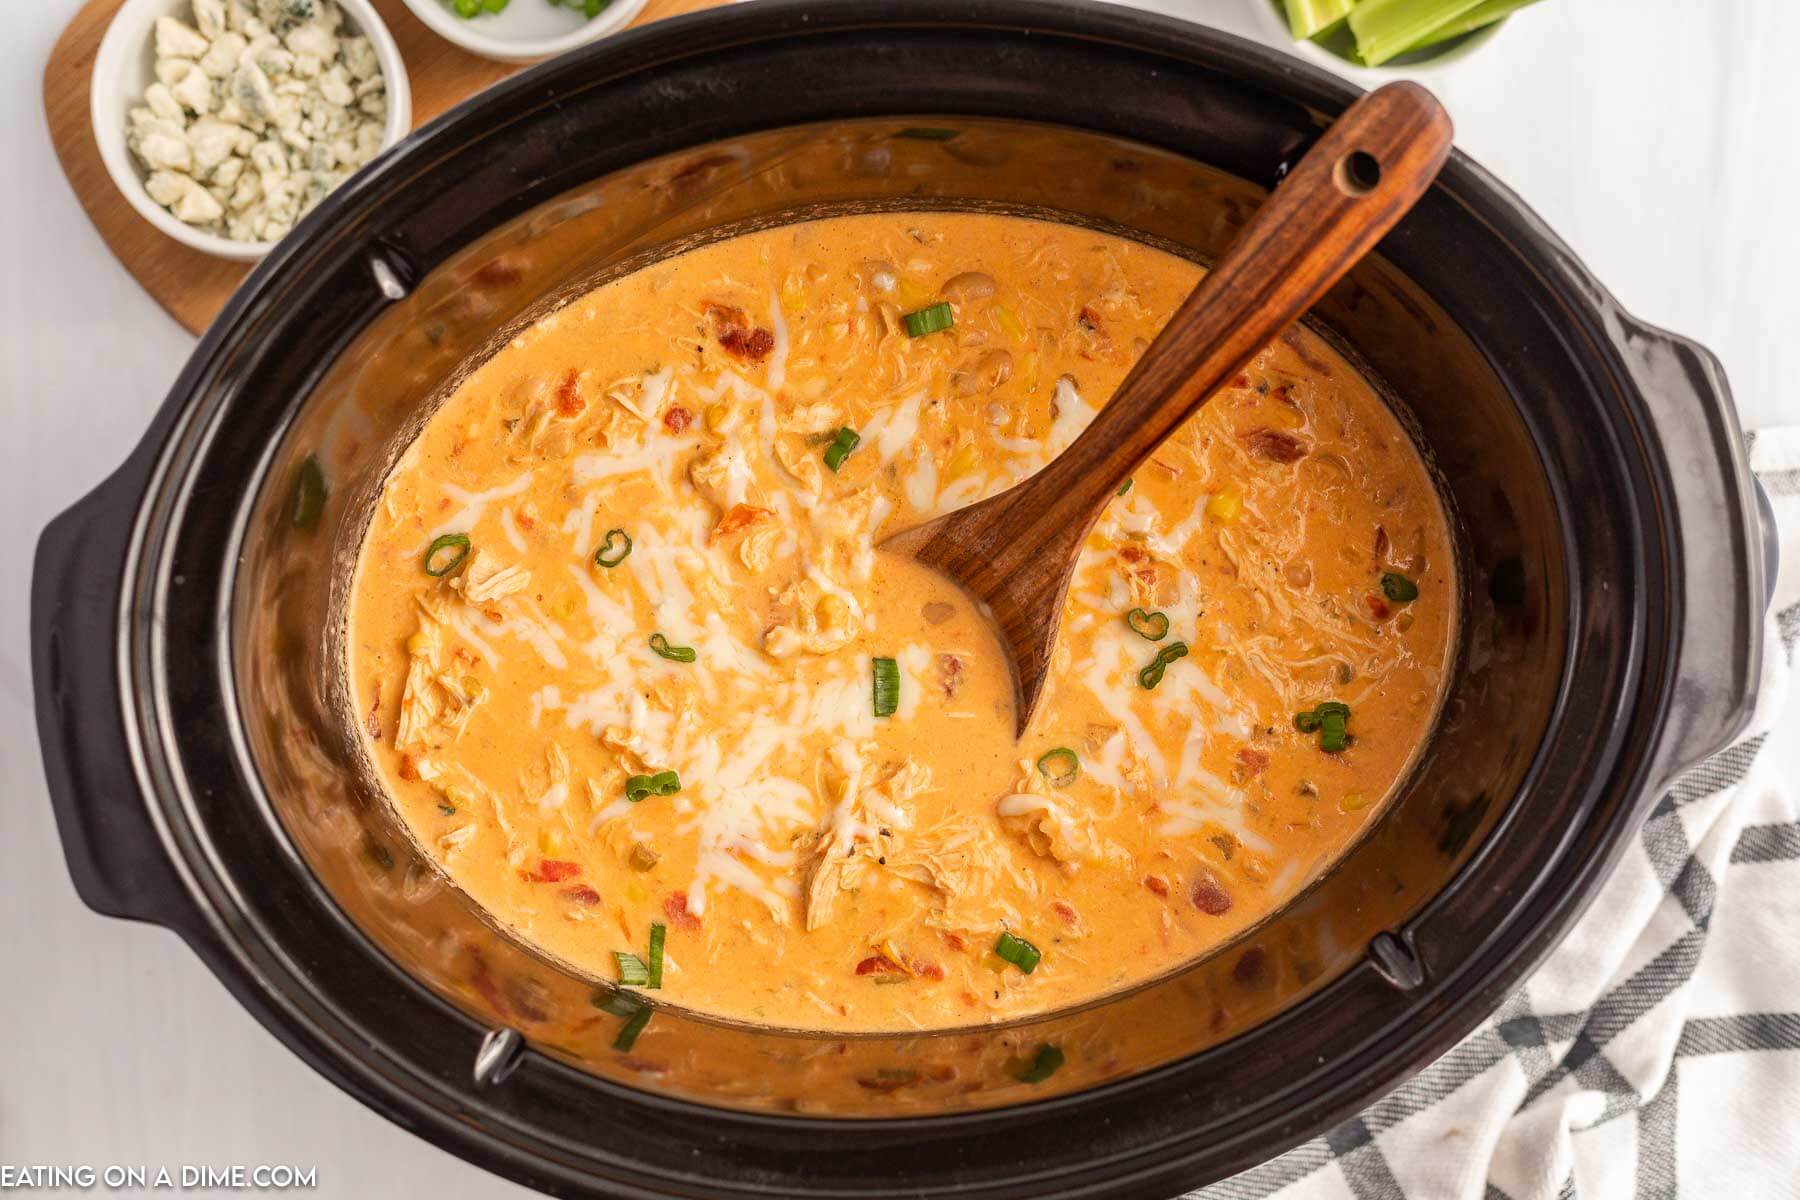 Buffalo Chicken Chili in the slow cooker with a wooden spoon